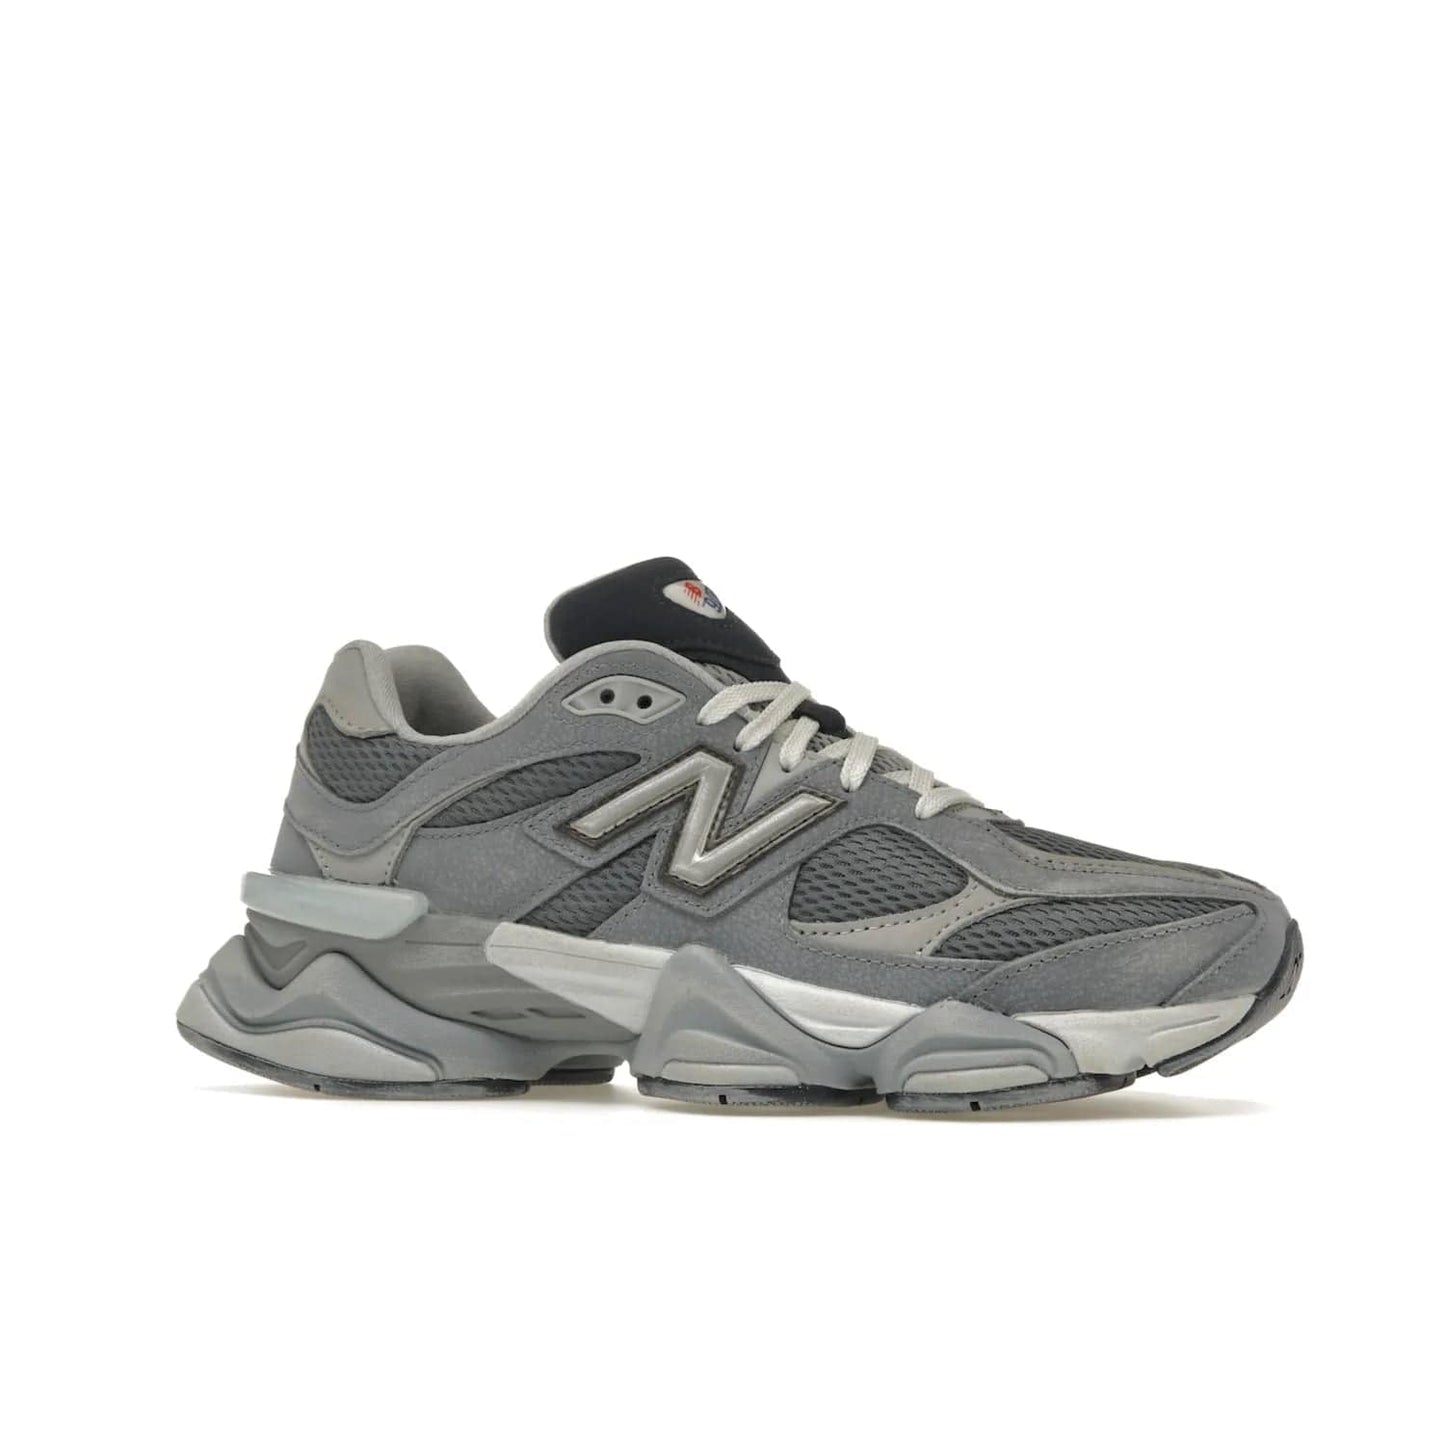 New Balance 9060 Grey Day (2023) - Image 3 - Only at www.BallersClubKickz.com - #
Sporty-meets-stylish in the New Balance 9060 Grey Day sneaker. Designed with Arctic Grey, Steel, and Silver Metallic, it offers an edgy but wearable look along with classic NB comfort and quality.